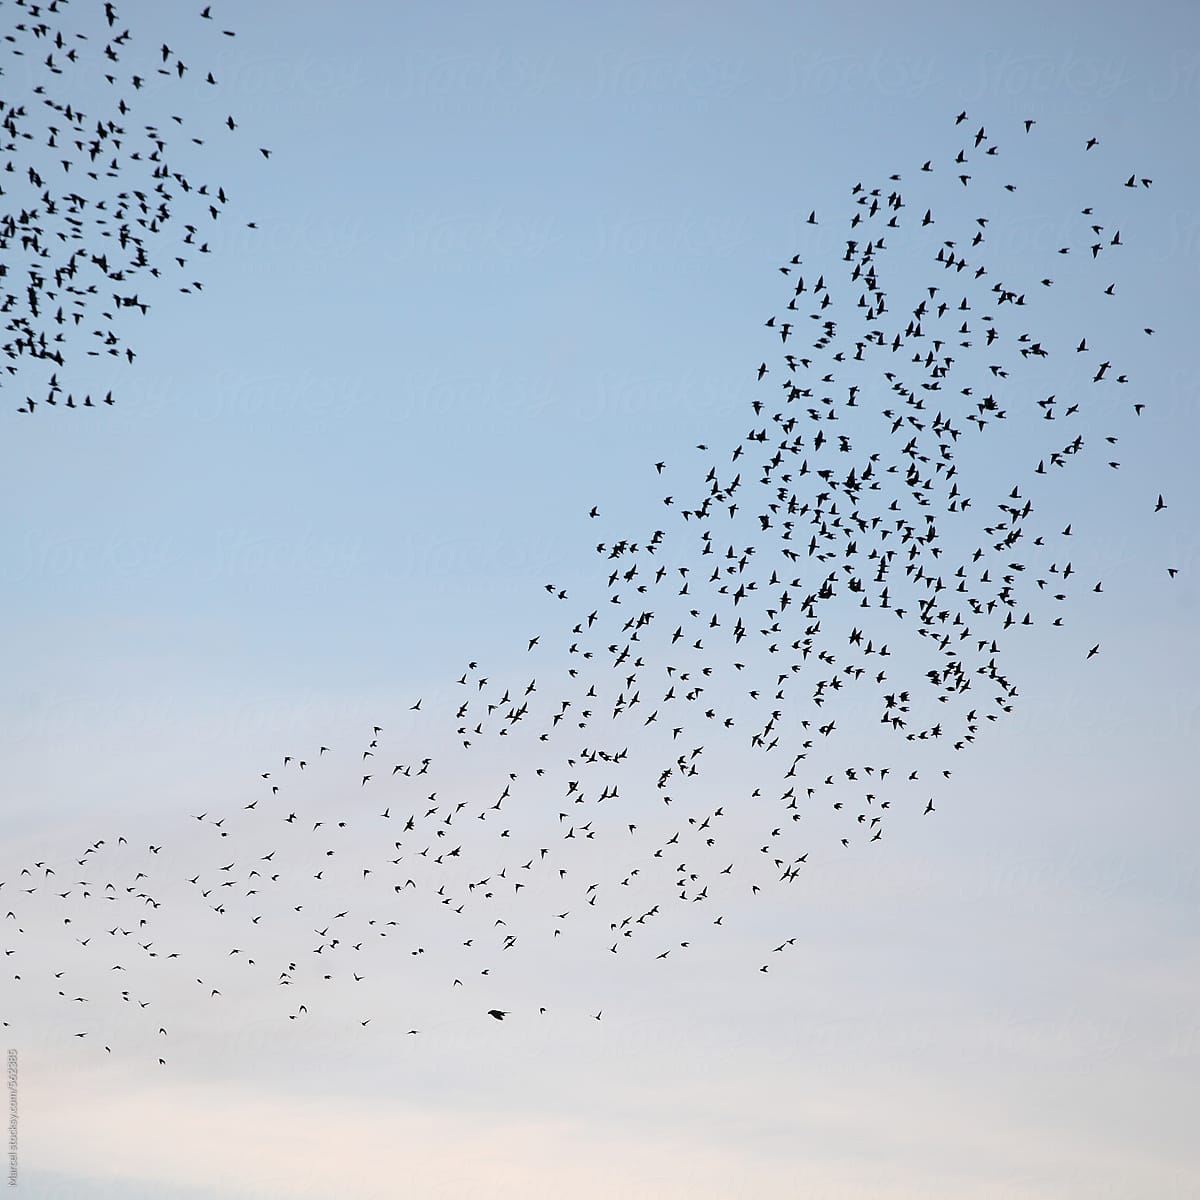 Dance of the starlings